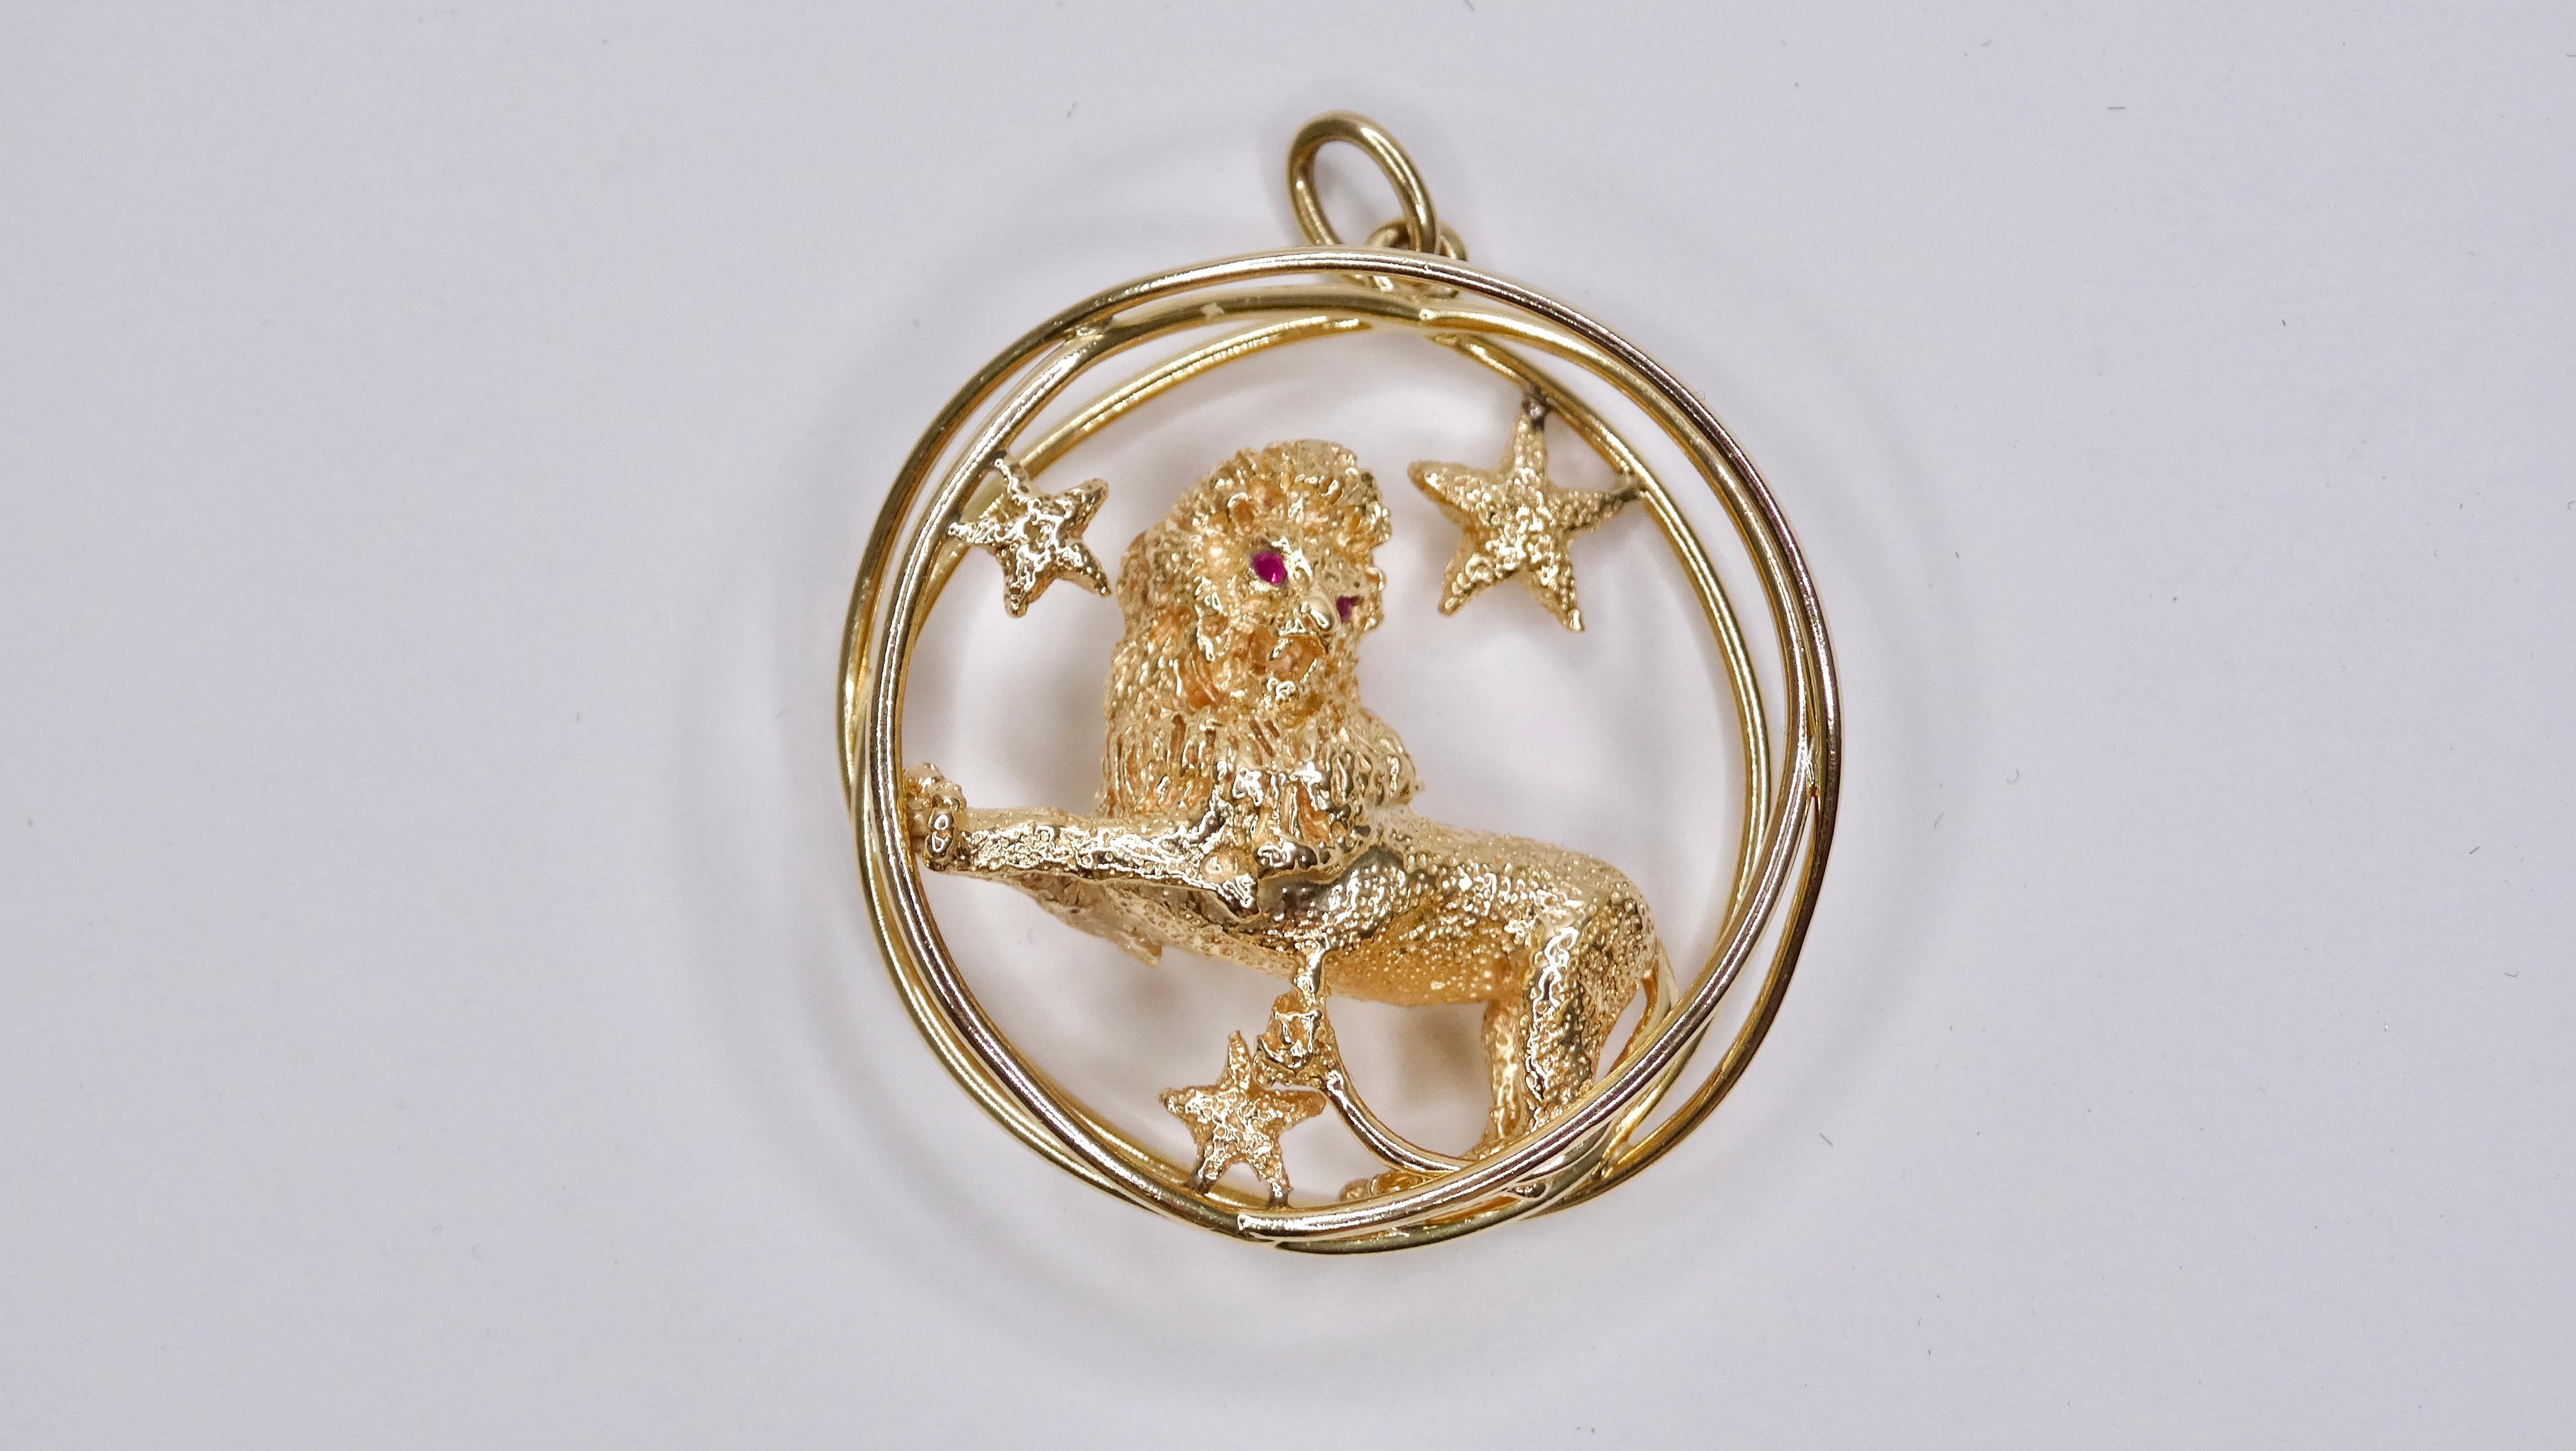 Add a little zodiac flair to your outfit! This is a large 14K gold Leo the lion charm/pendant, made and signed by William Ruser. It features a textured three-dimensional body, ruby eyes, surrounded by three stars. This lion is powerful and full of